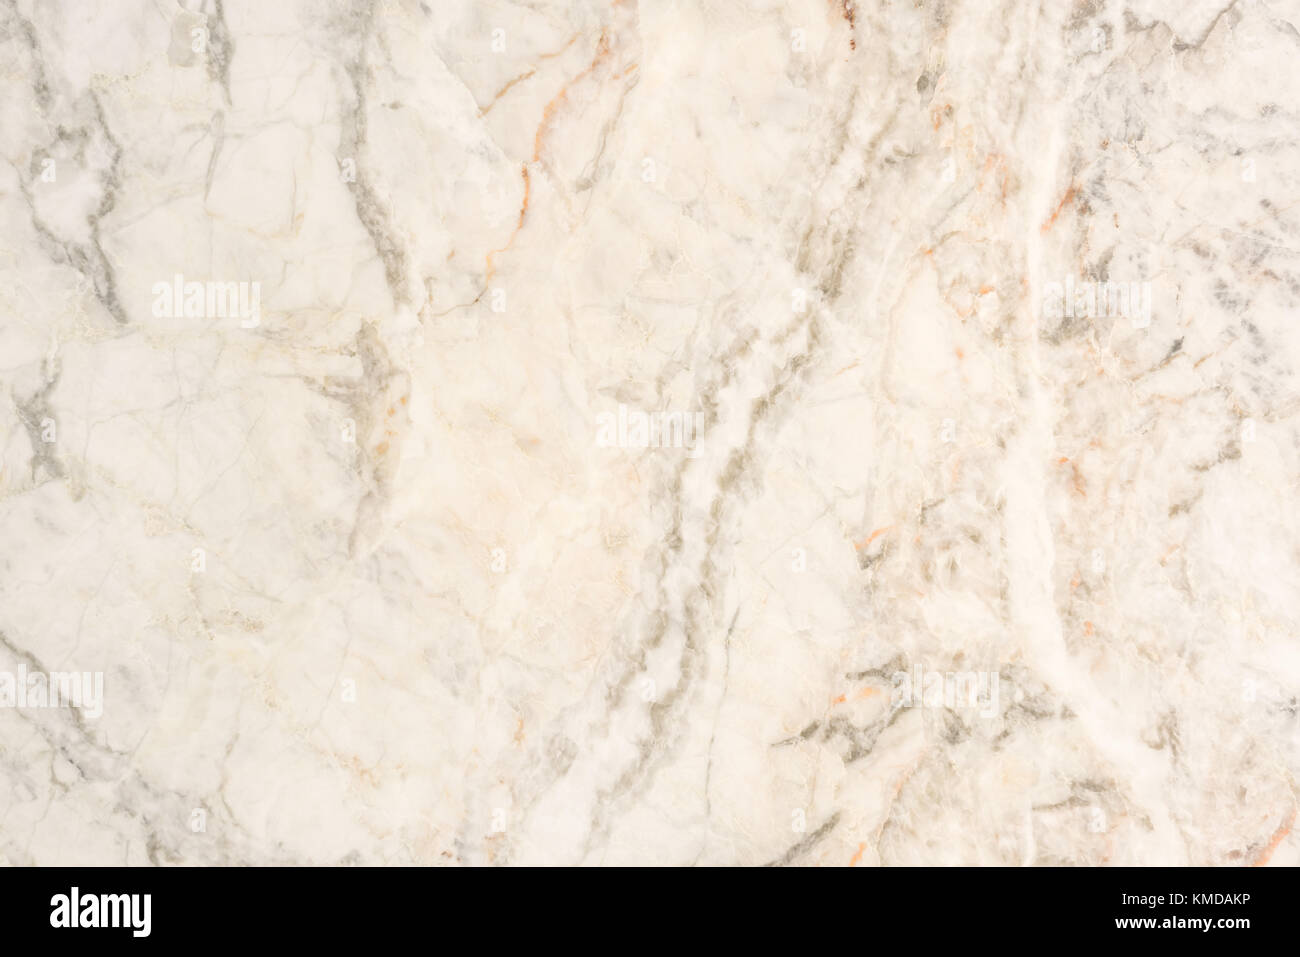 Beige Marble stone natural light for bathroom or kitchen white countertop. High resolution texture and pattern. Stock Photo